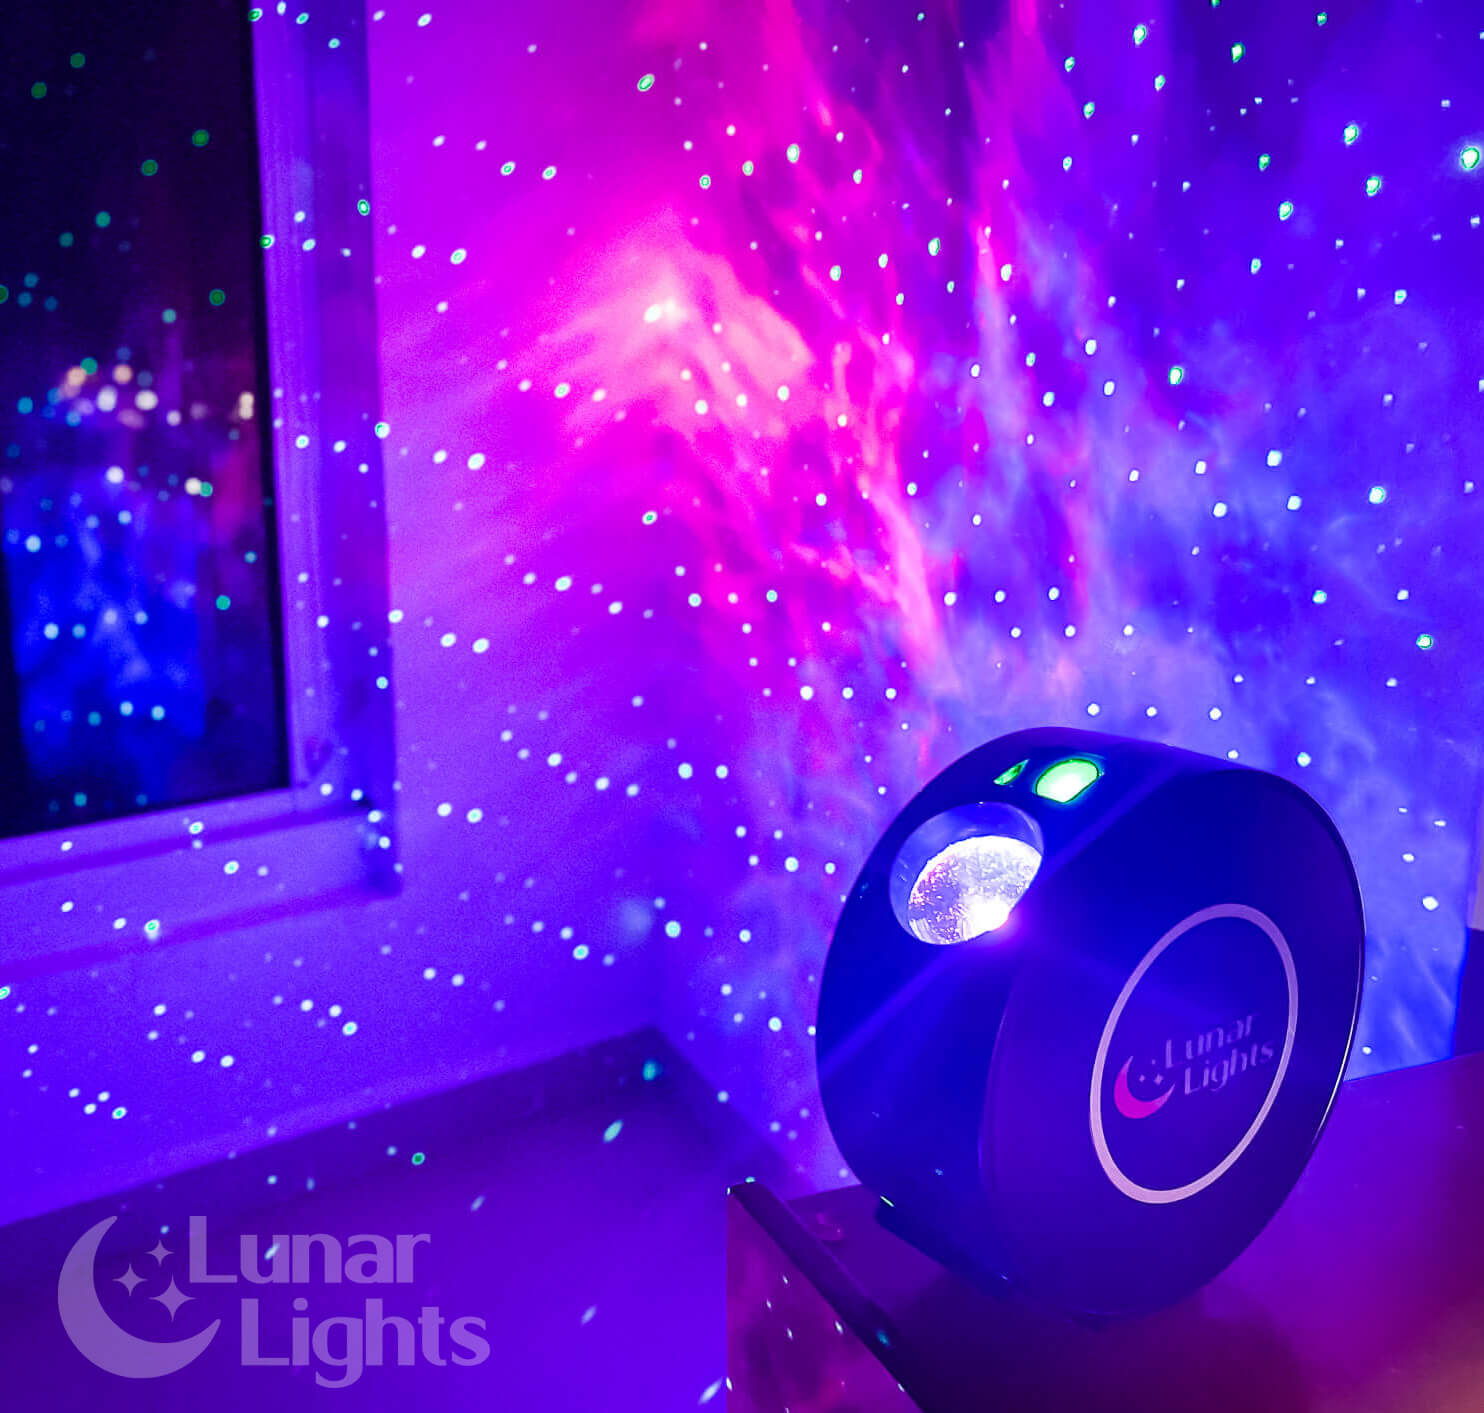 Galaxy Lamps Galaxy Projector 2.0 Review - Seeing Stars! 